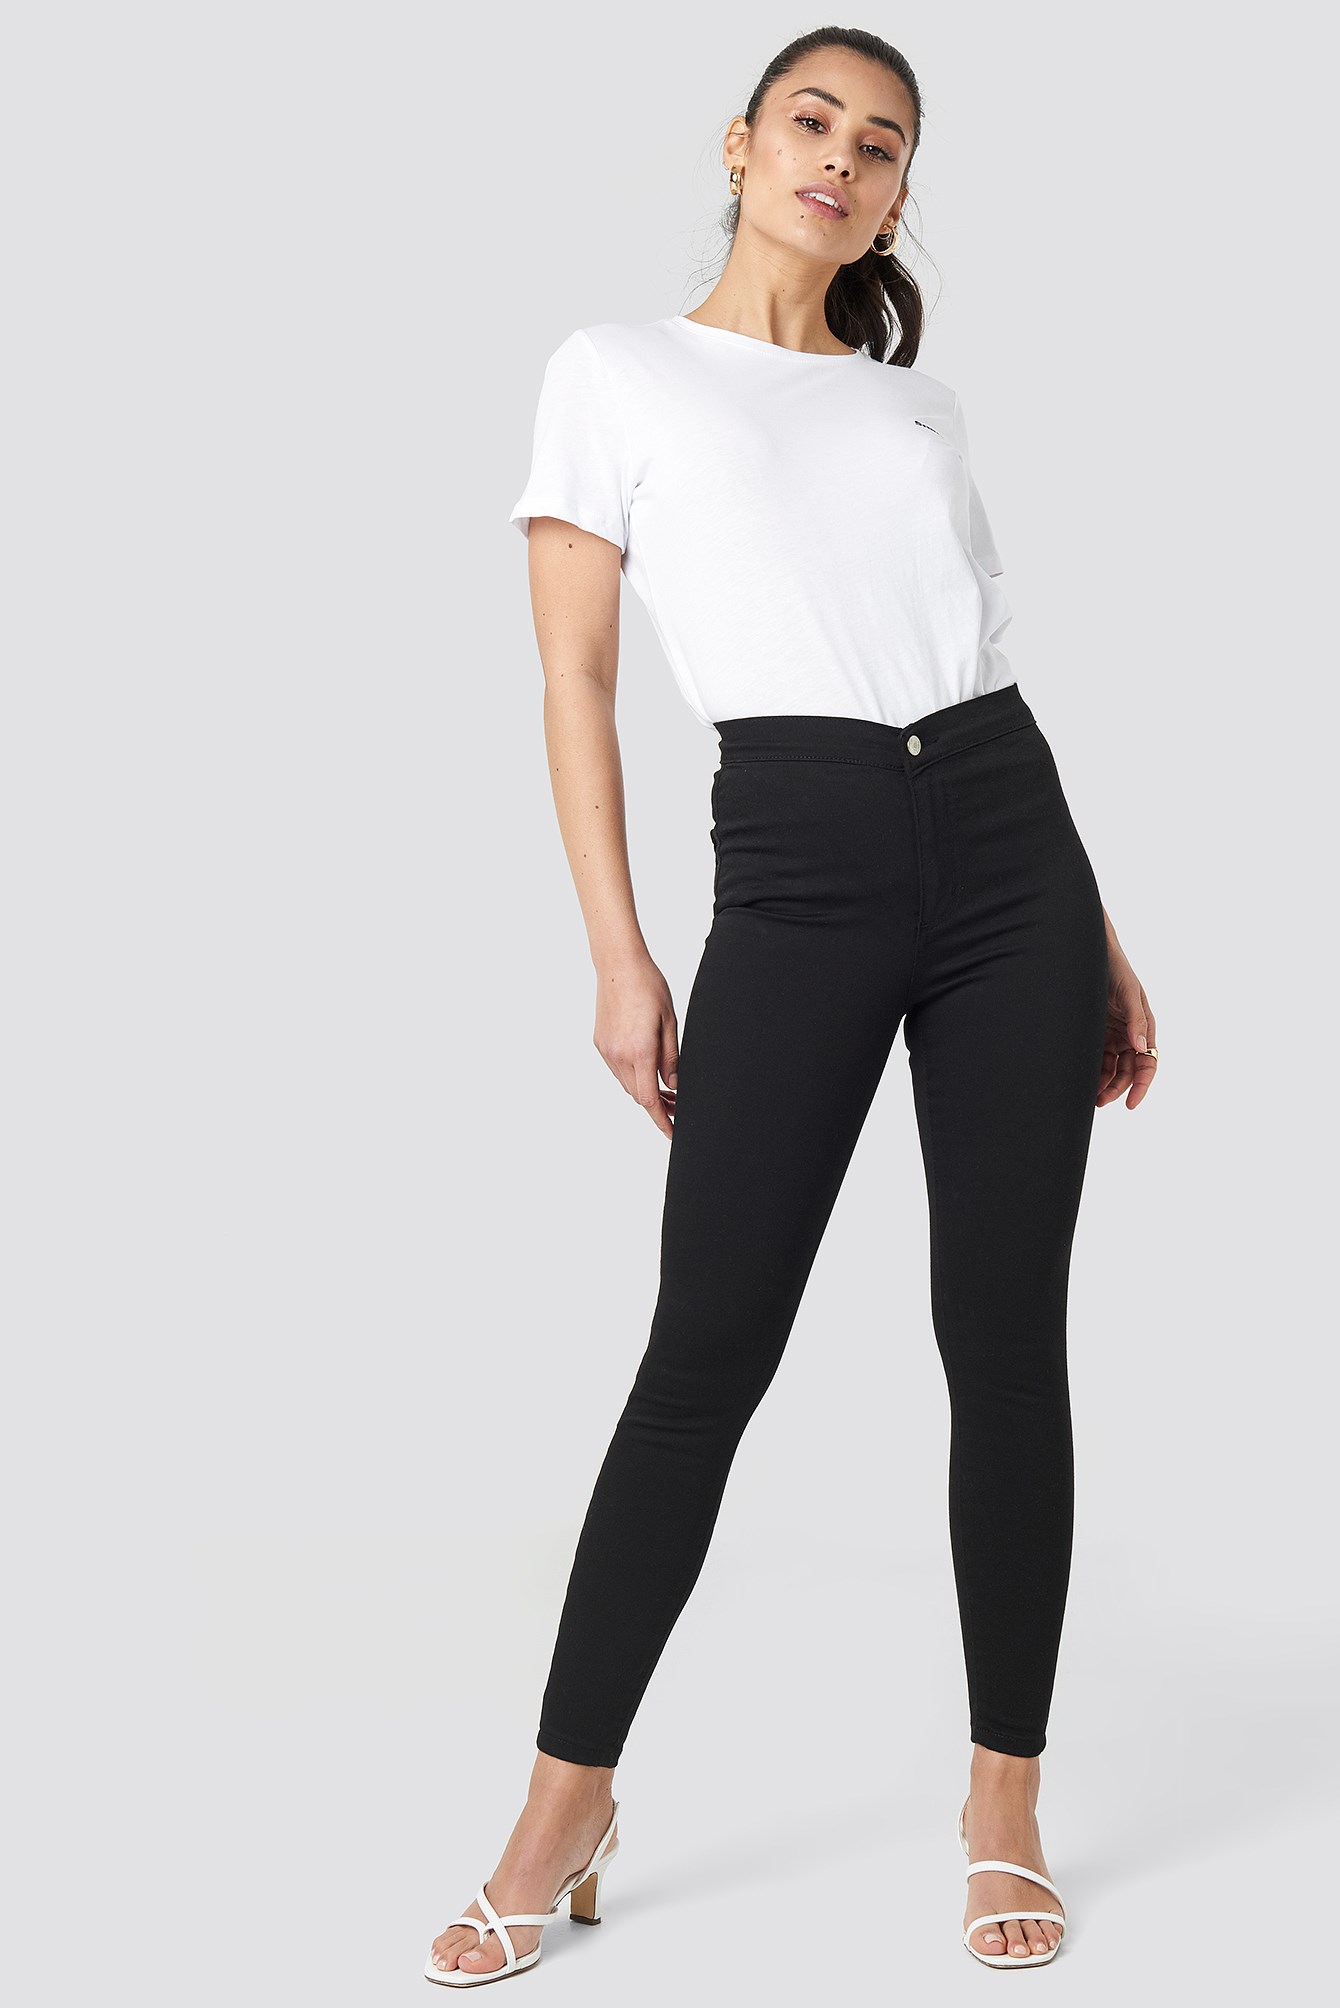 black jeggings outfit